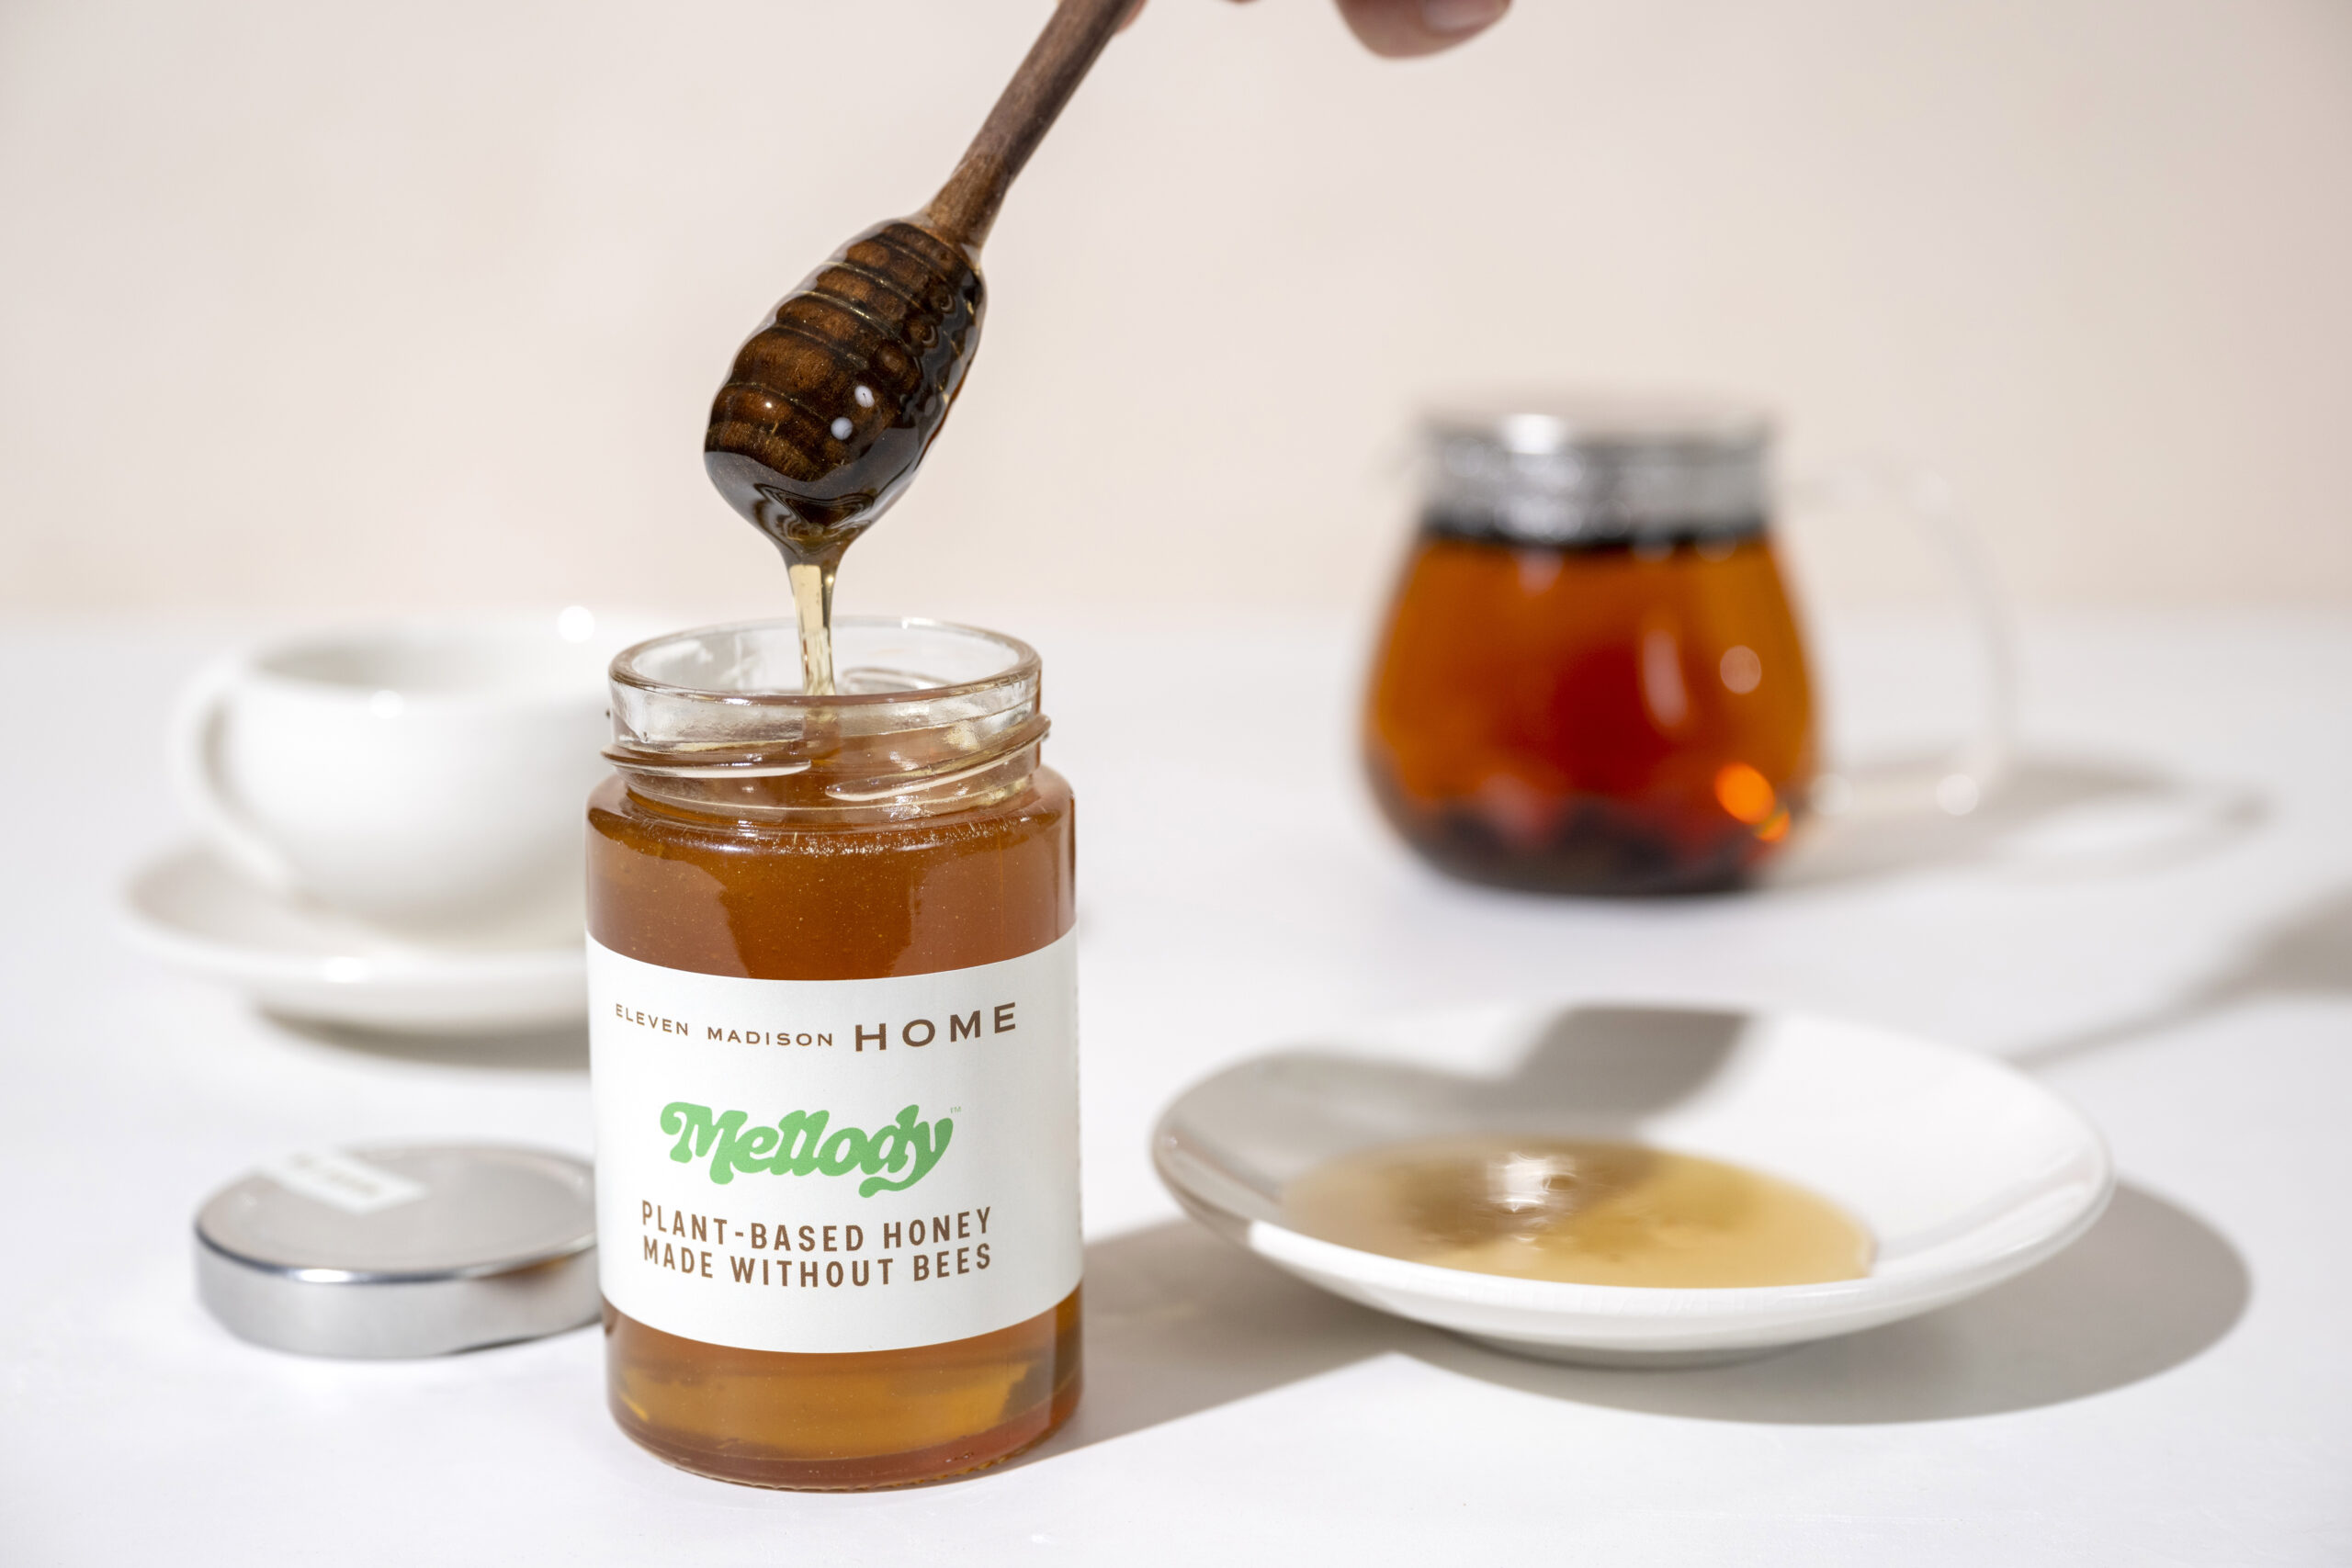 NYC Foodies curious about Plant-Based Honey Taste? Mellody's Darko Mandich reveals the Surprise